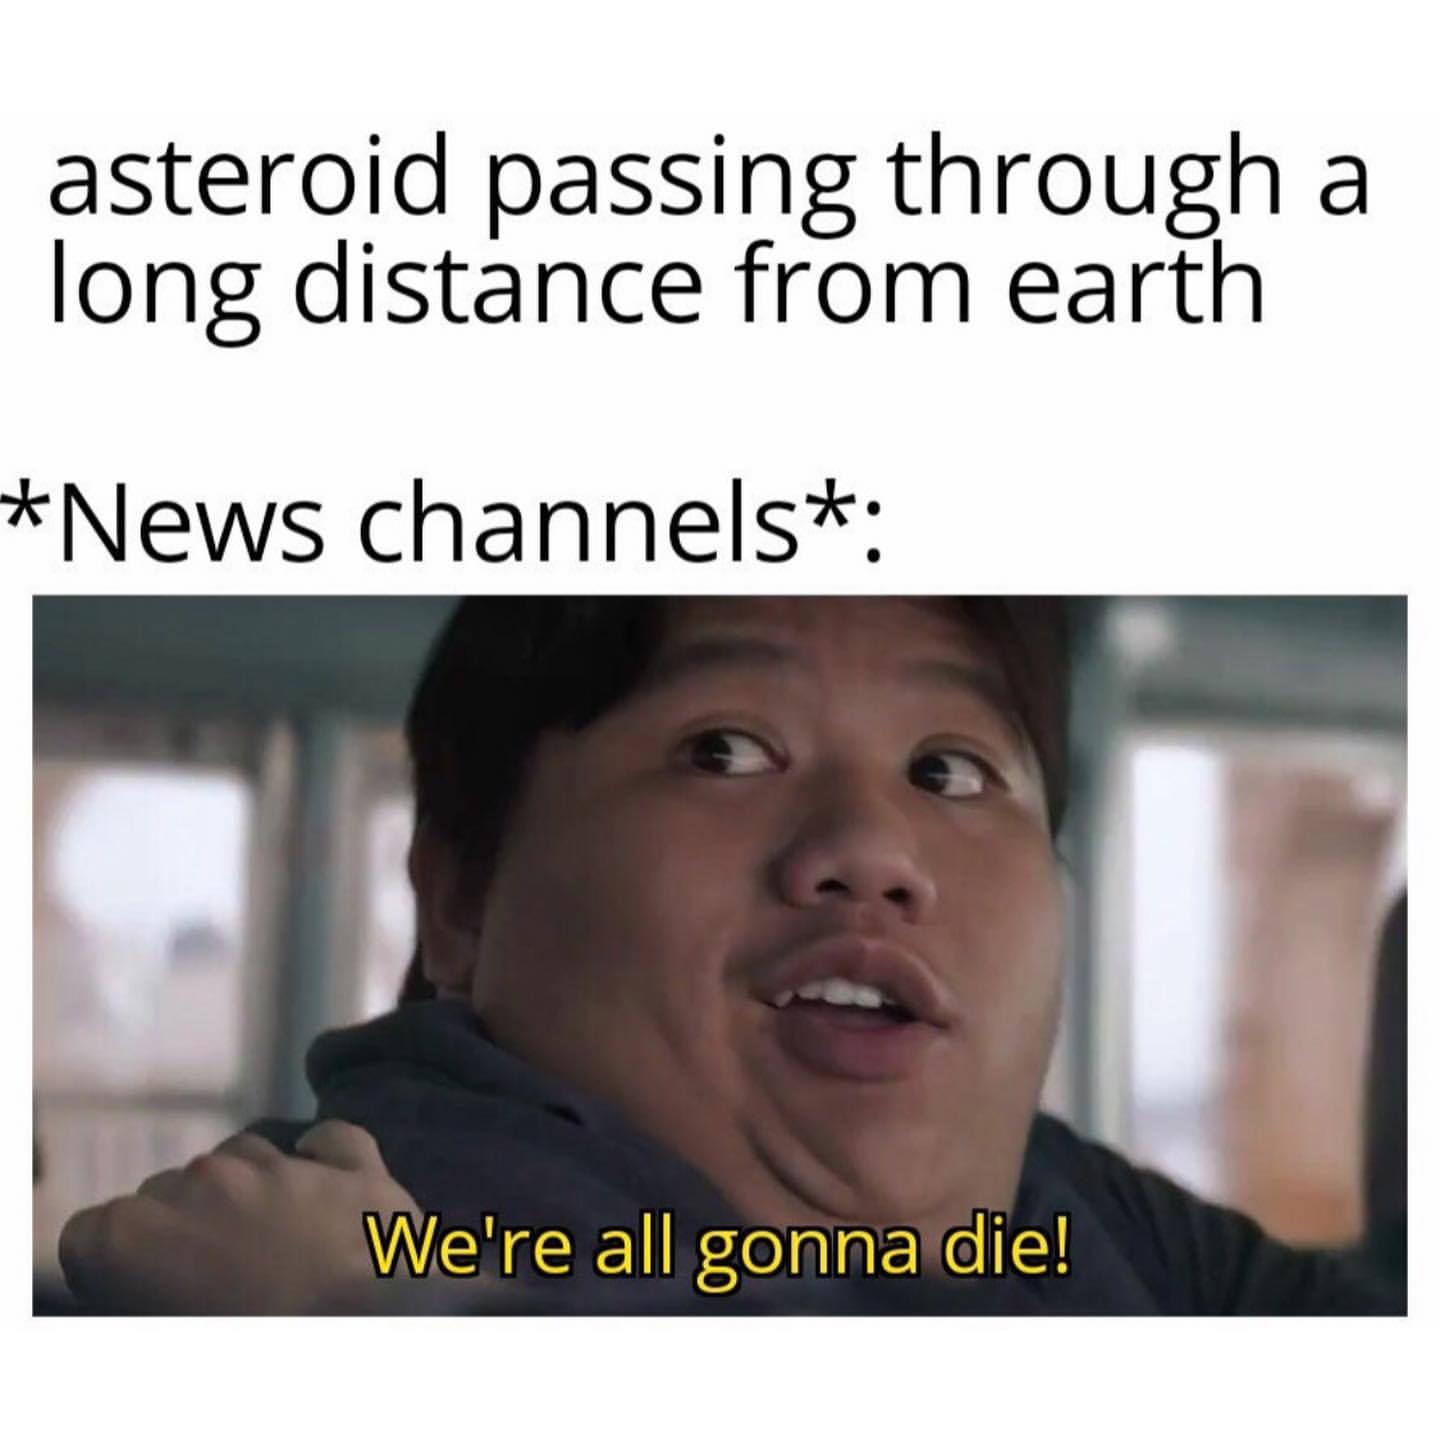 Asteroid passing through a long distance from earth *News channels*: We're all gonna die!